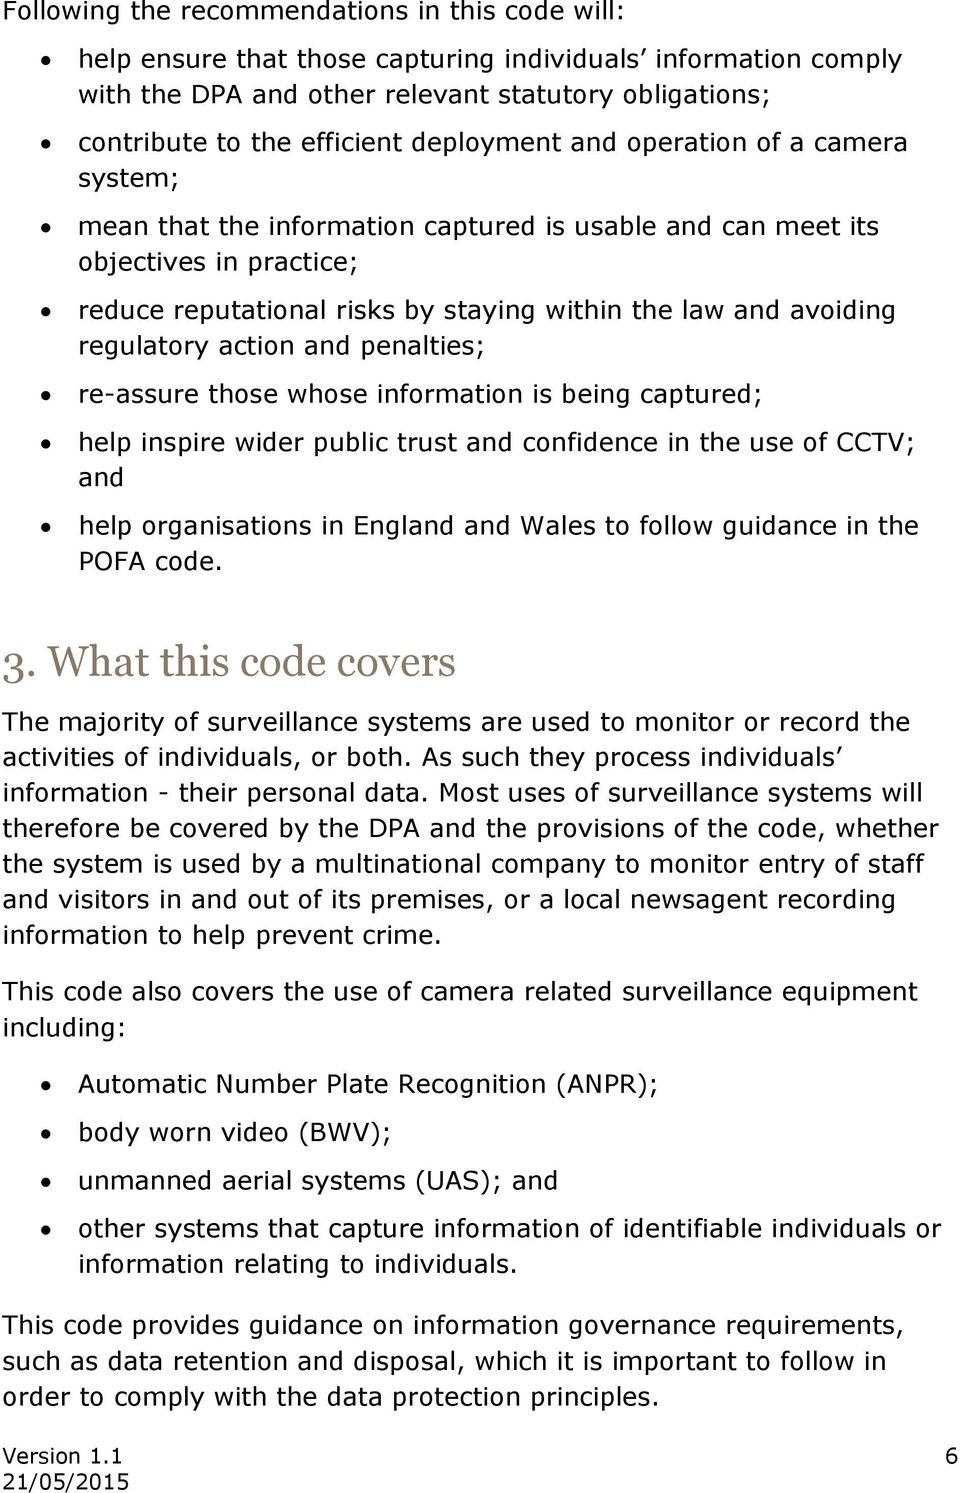 regulatory action and penalties; re-assure those whose information is being captured; help inspire wider public trust and confidence in the use of CCTV; and help organisations in England and Wales to